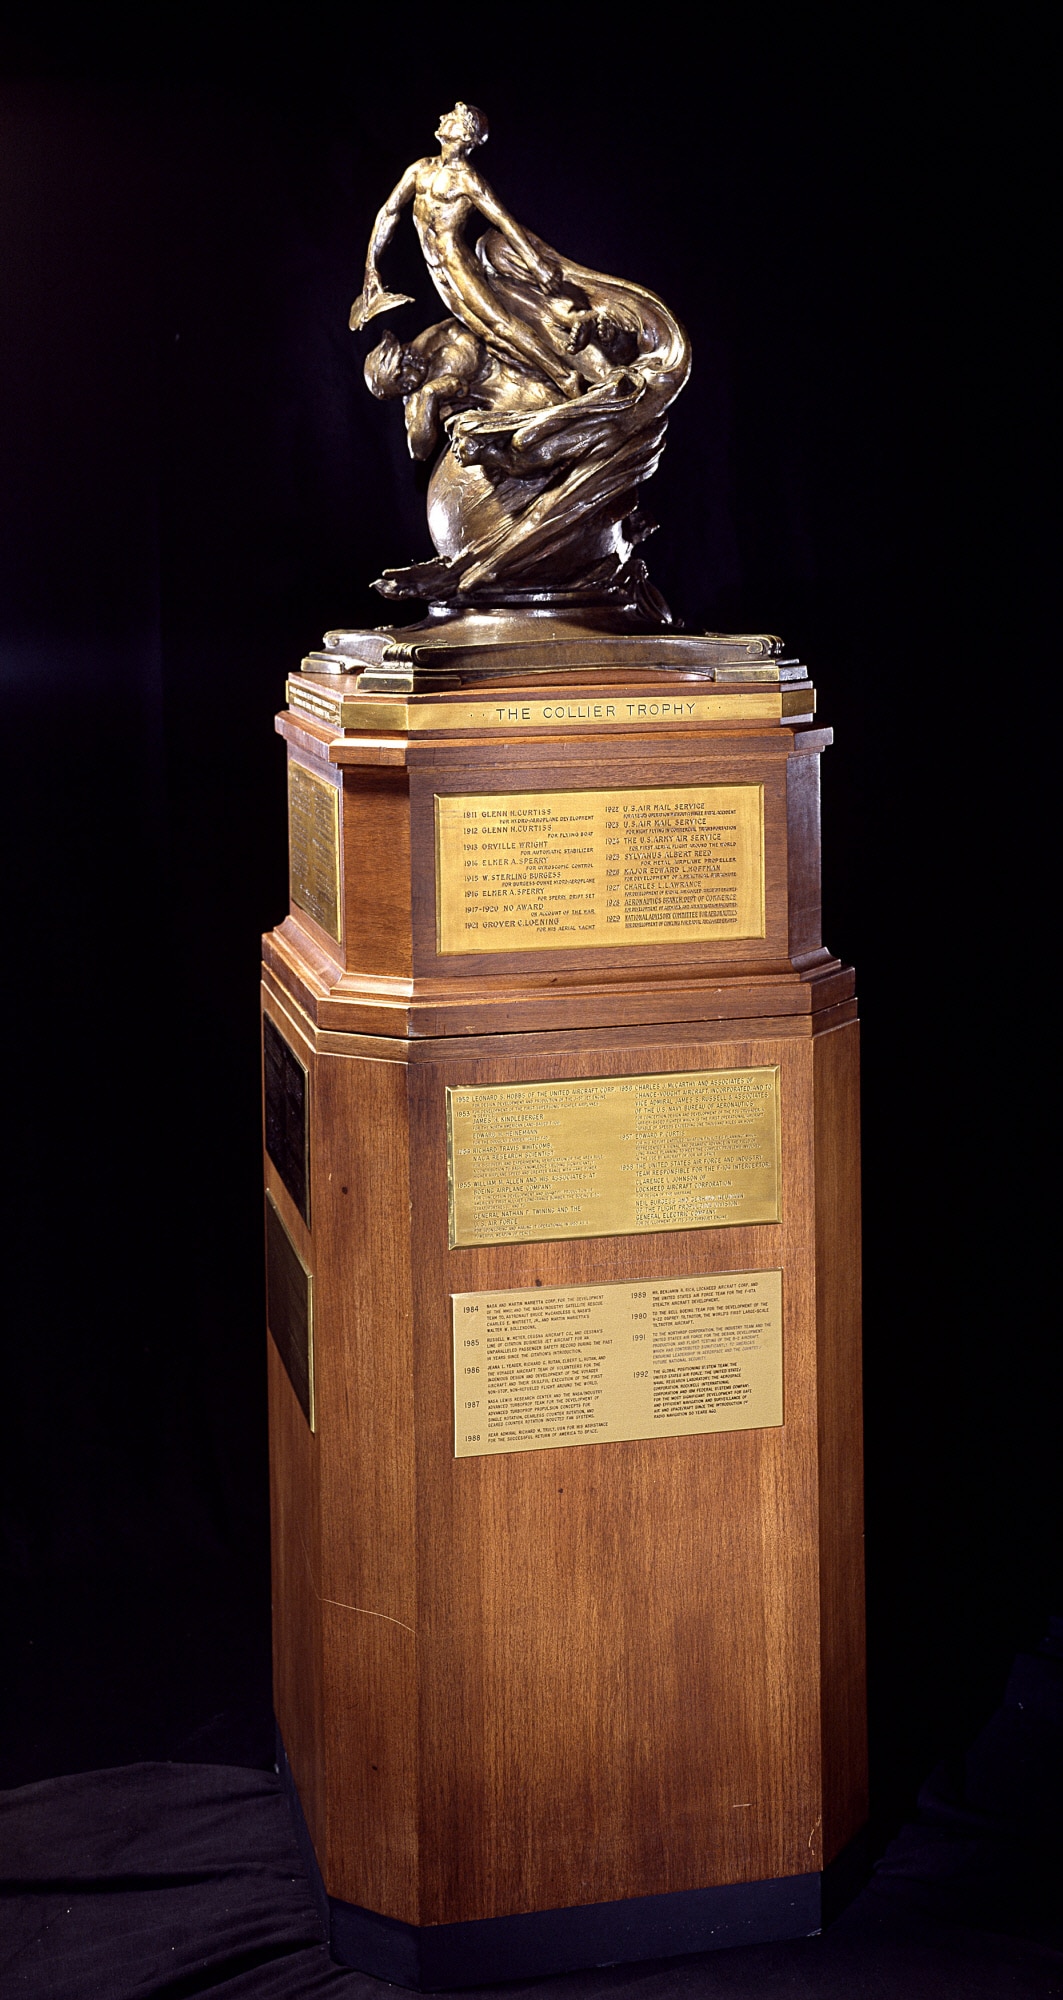 The Collier Trophy was established in 1911 by Robert J. Collier, publisher and early President of the Aero Club of America. The trophy is administered by the National Aeronautic Association of the U.S.A. and is awarded annually for "the greatest achievement in aeronautics or astronautics in America, with respect to improving the performance, efficiency, and safety of air or space vehicles, the value of which has been thoroughly demonstrated by actual use during the preceding year.” It is permanently housed at the Smithsonian National Air and Space Museum in Washington, D.C. (Photo courtesy of the Smithsonian Institution)